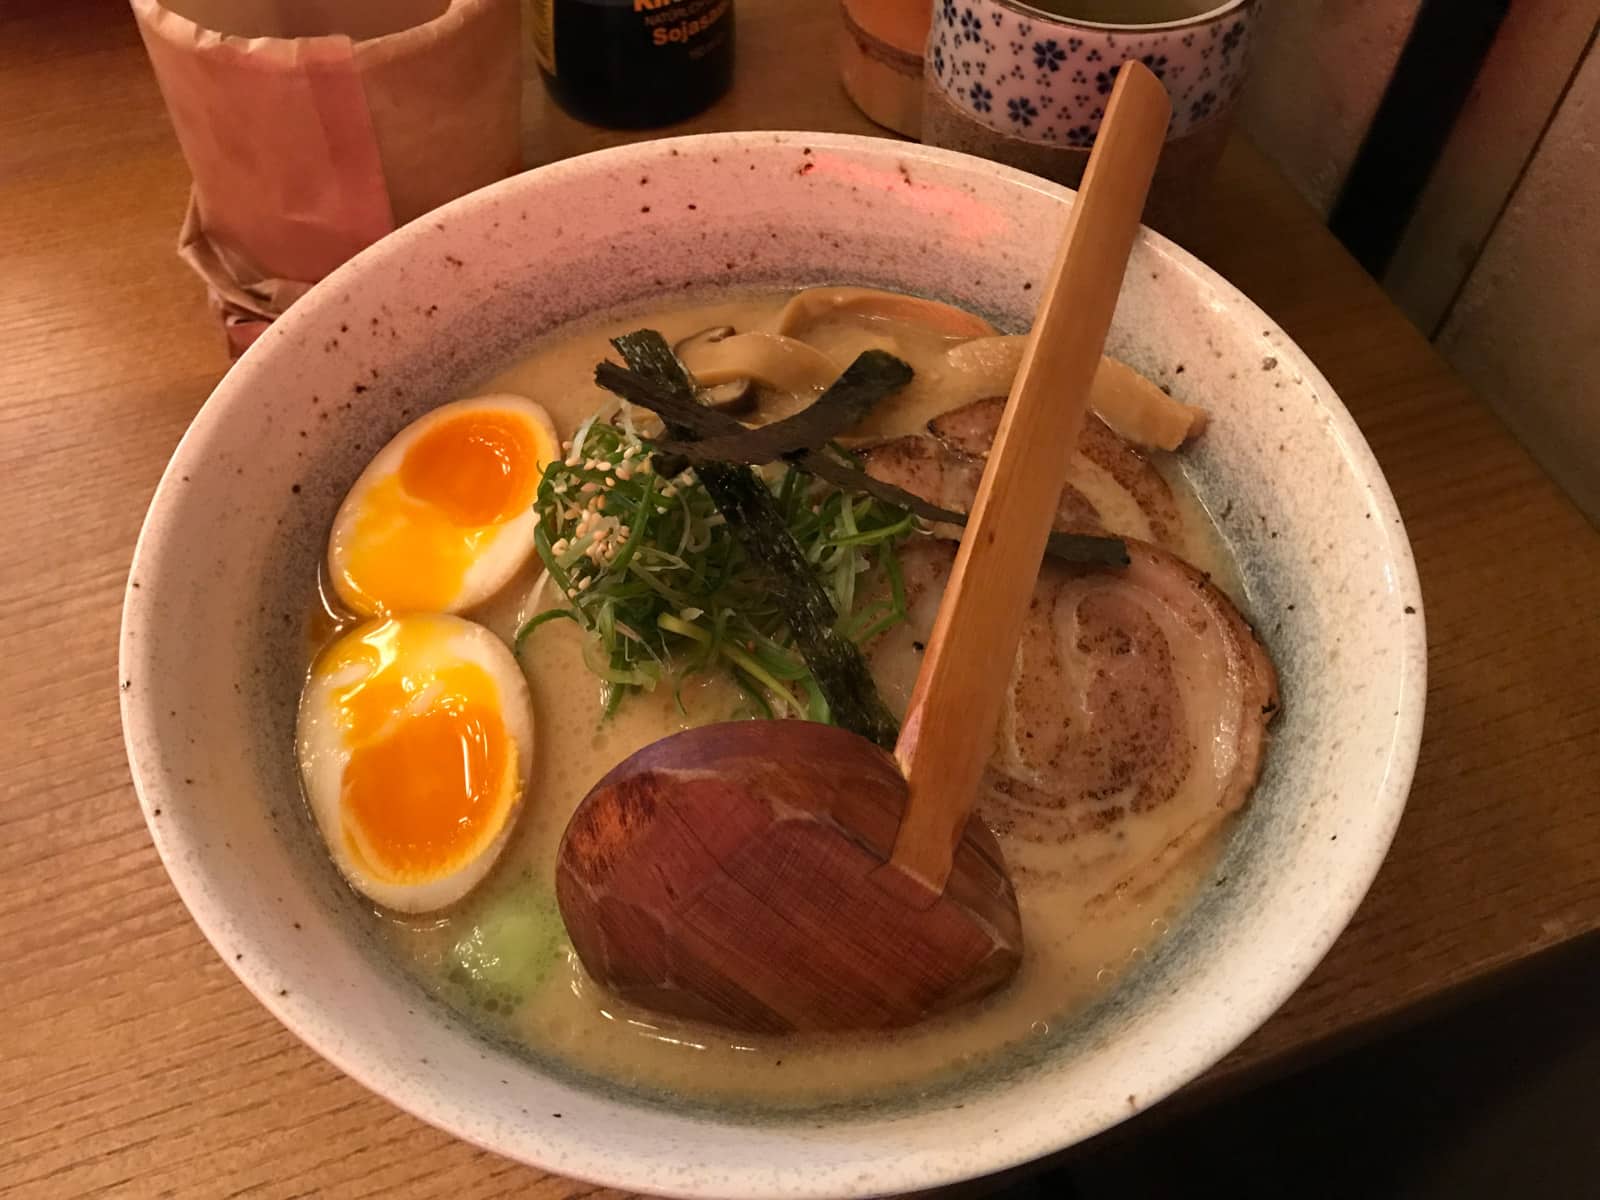 A bowl of ramen with egg, dry seaweed, and sliced pork